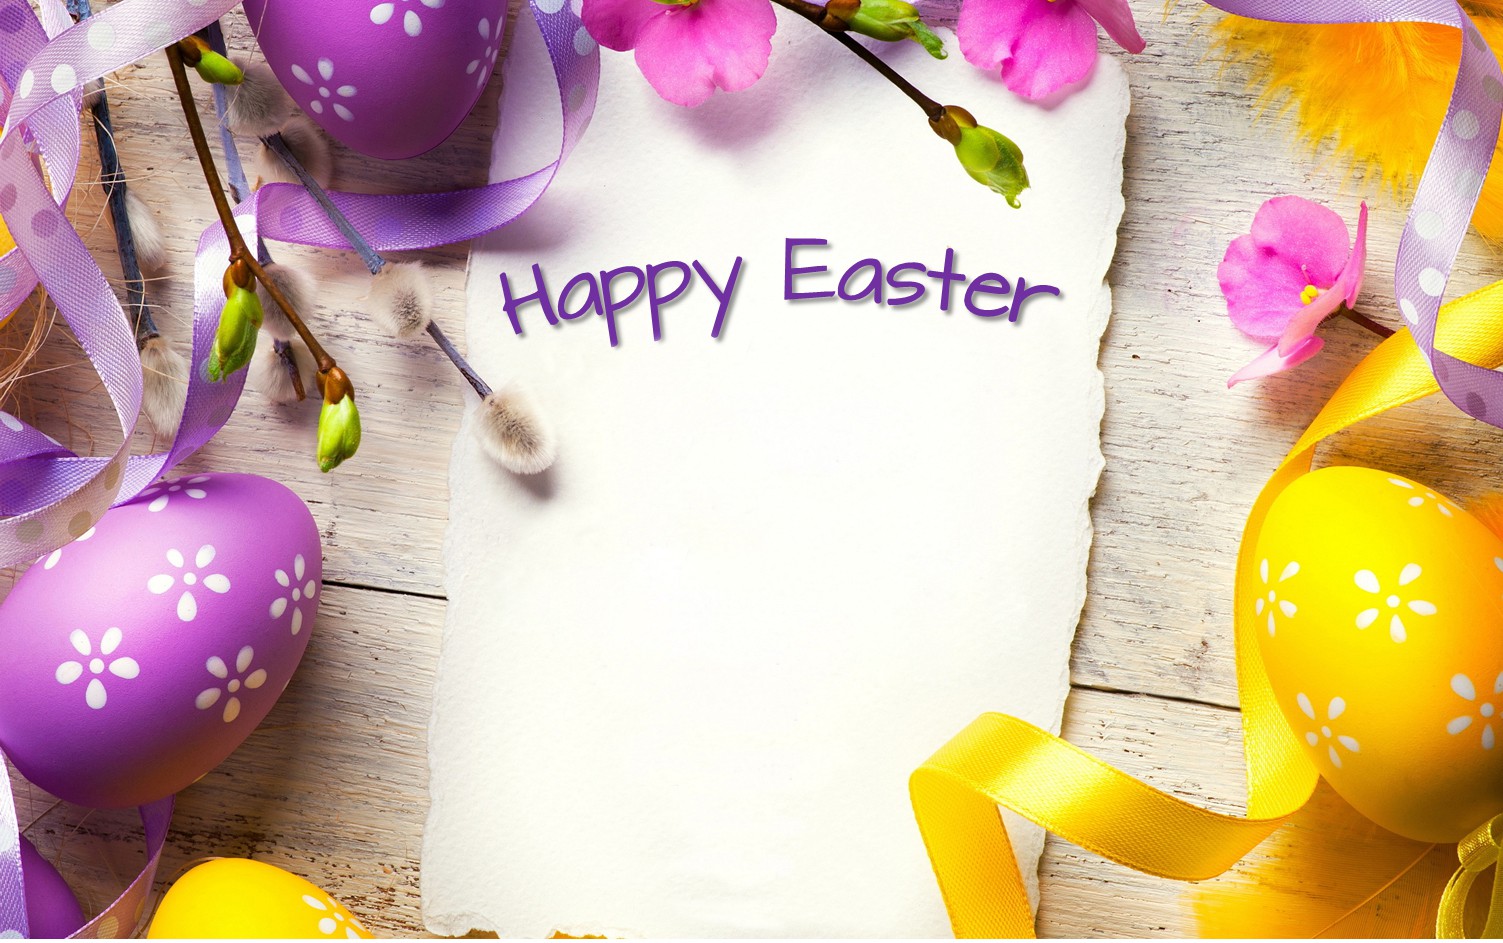 Happy Easter Friends Image New HD Wallpaper